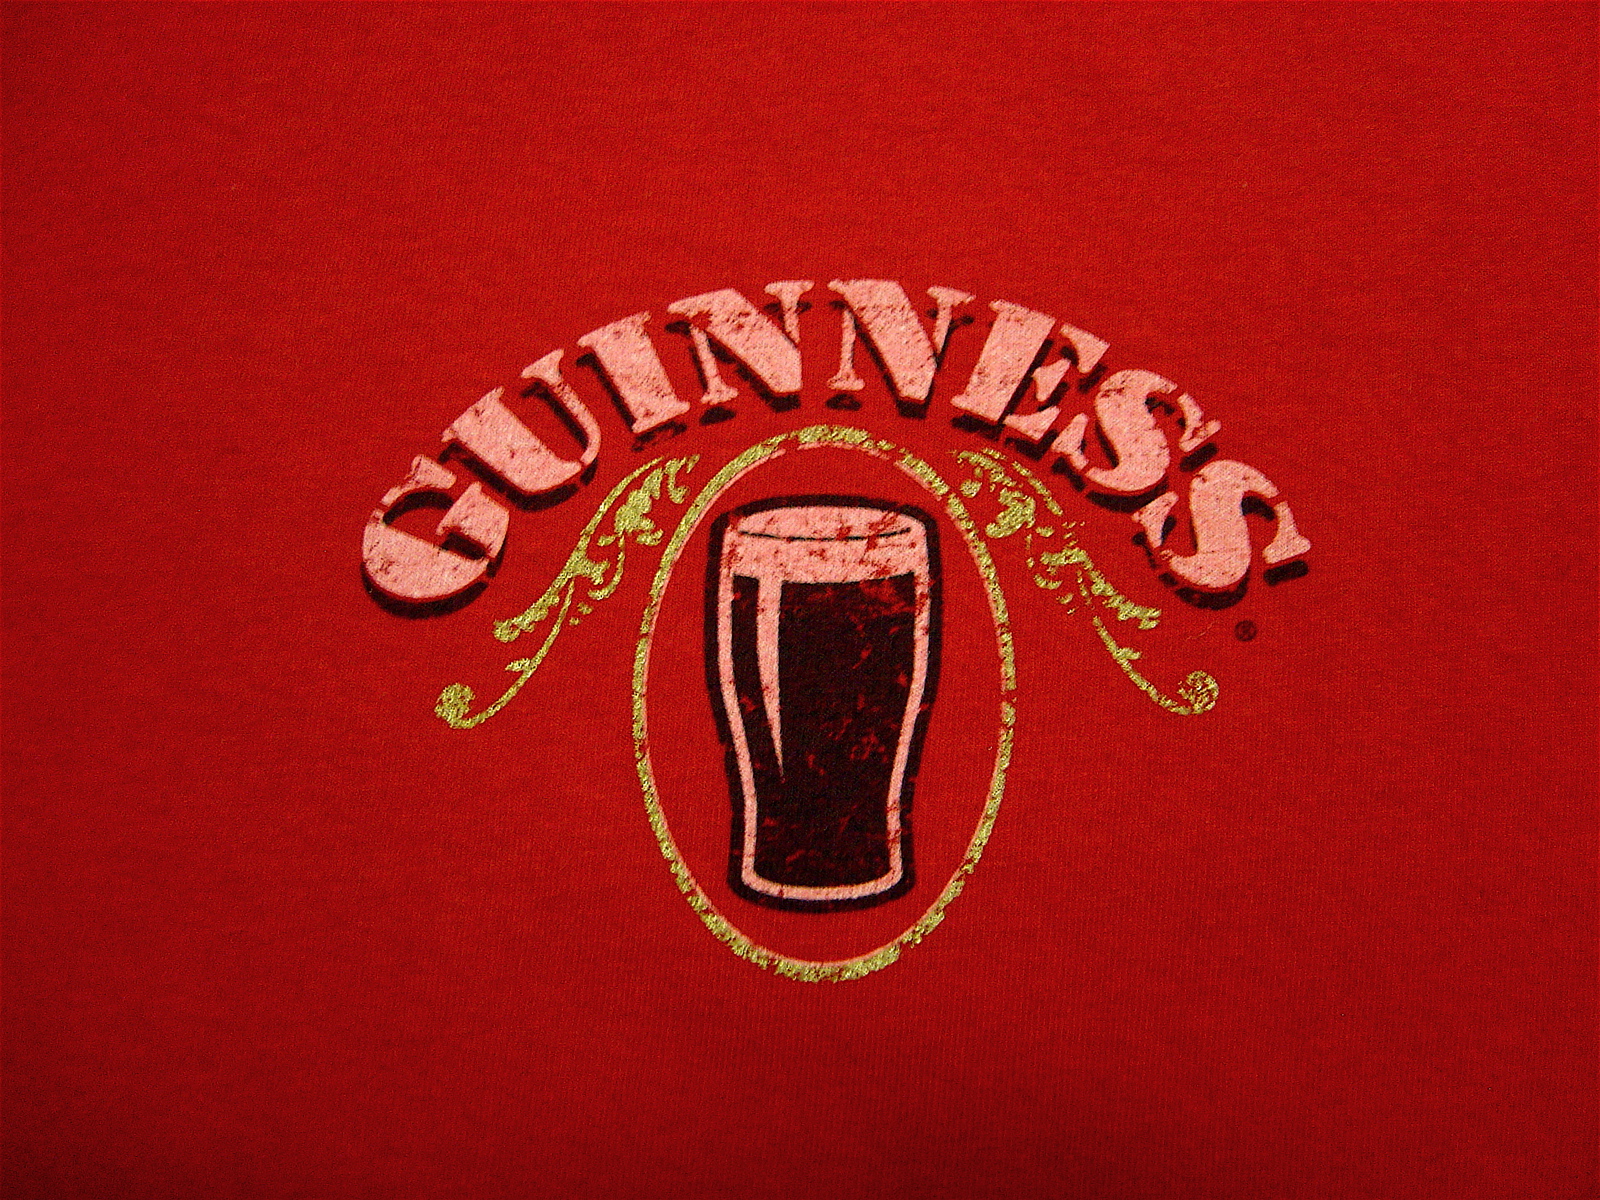 Man Made Guinness HD Wallpaper | Background Image